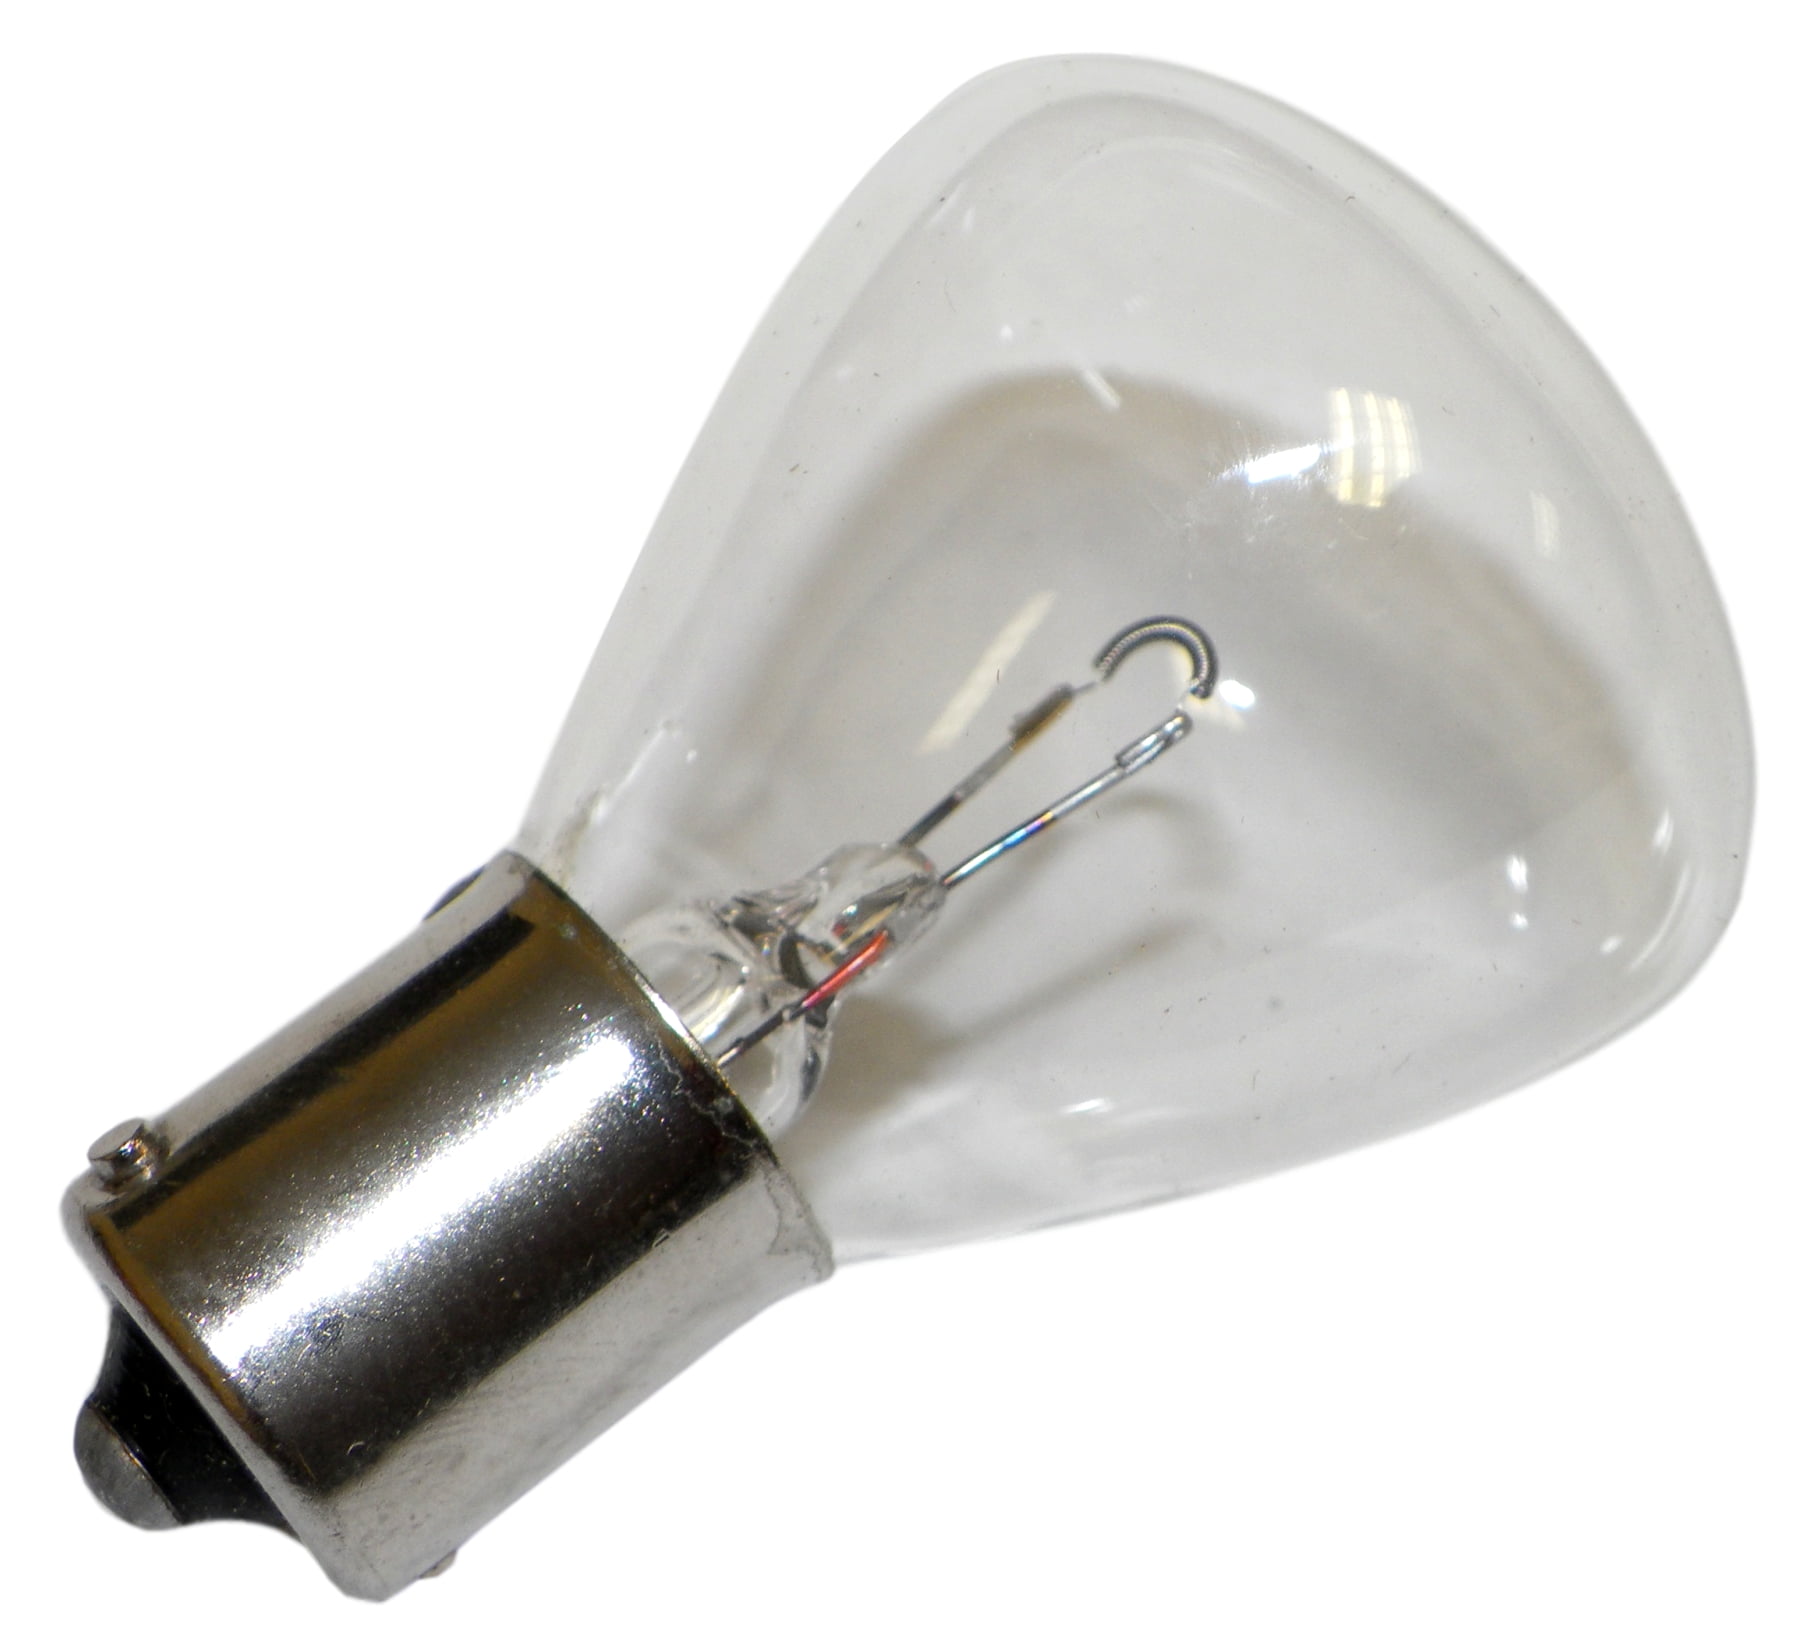 REPLACEMENT BULB FOR PHILIPS 13529 9W 6V